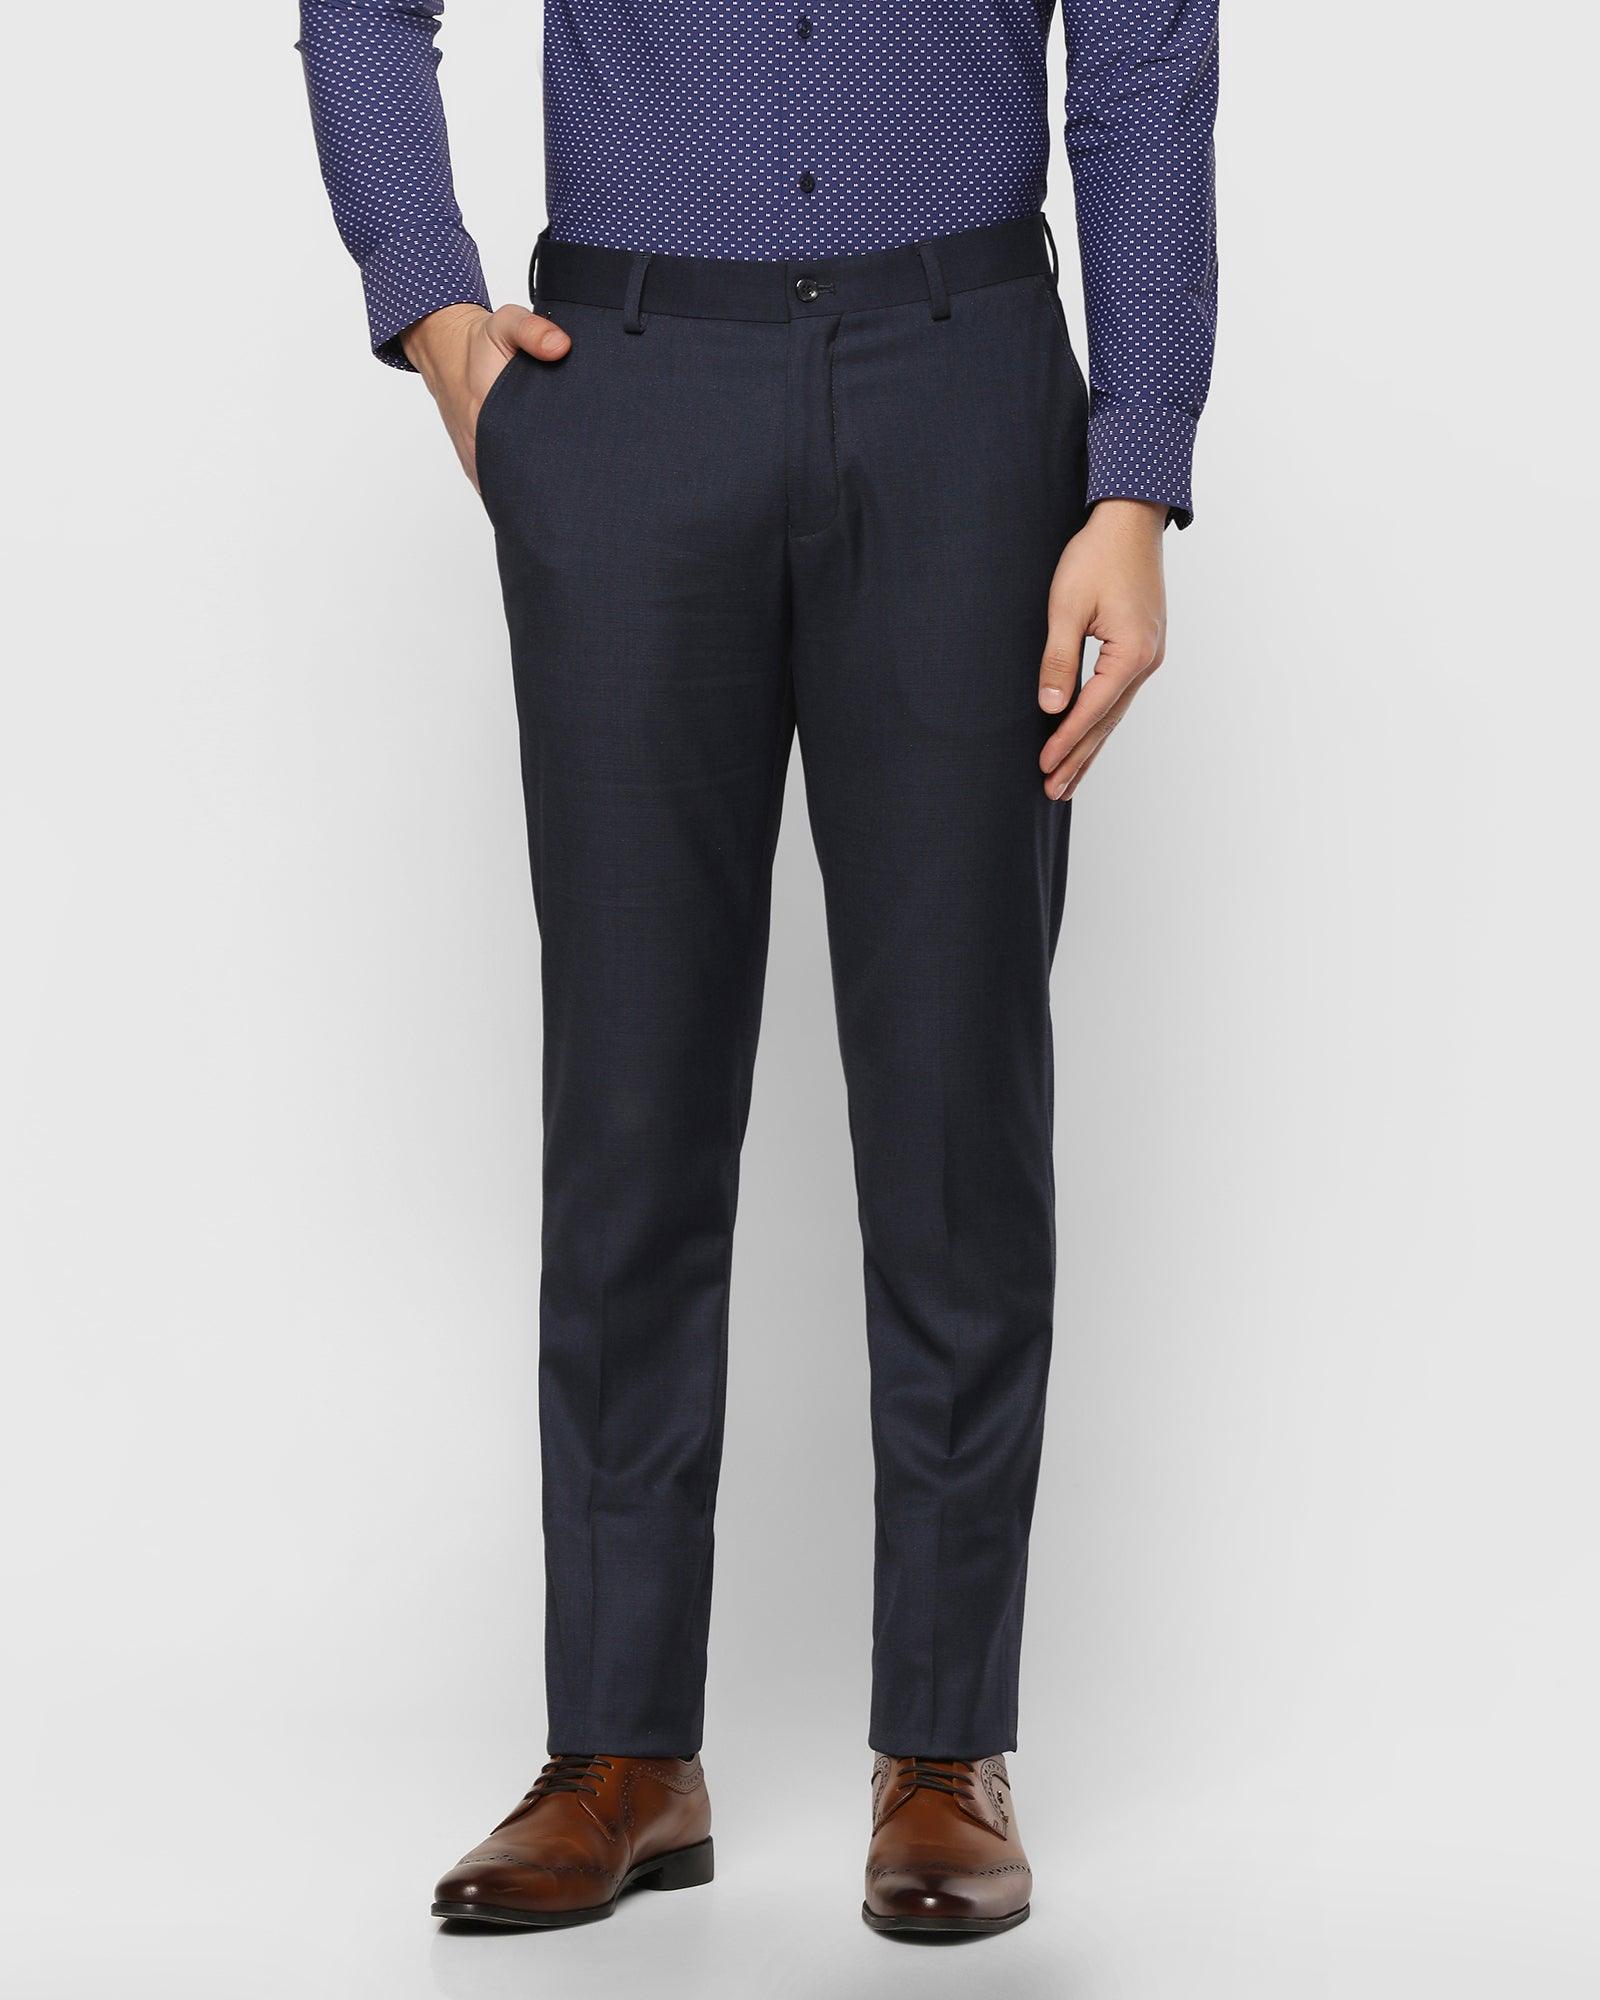 Slim Fit B-91 Formal Navy Textured Trouser - Solo